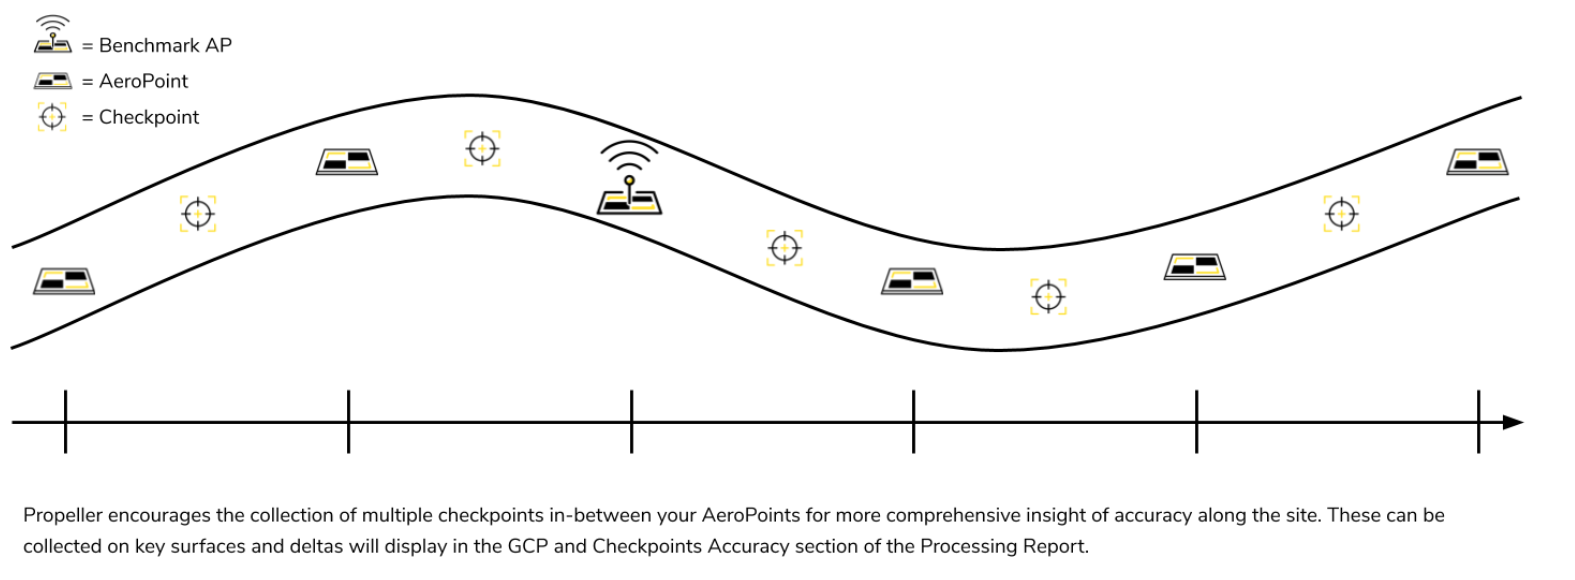 FlyingCorridors_6_AeroPoints_and_Checkpoints.png